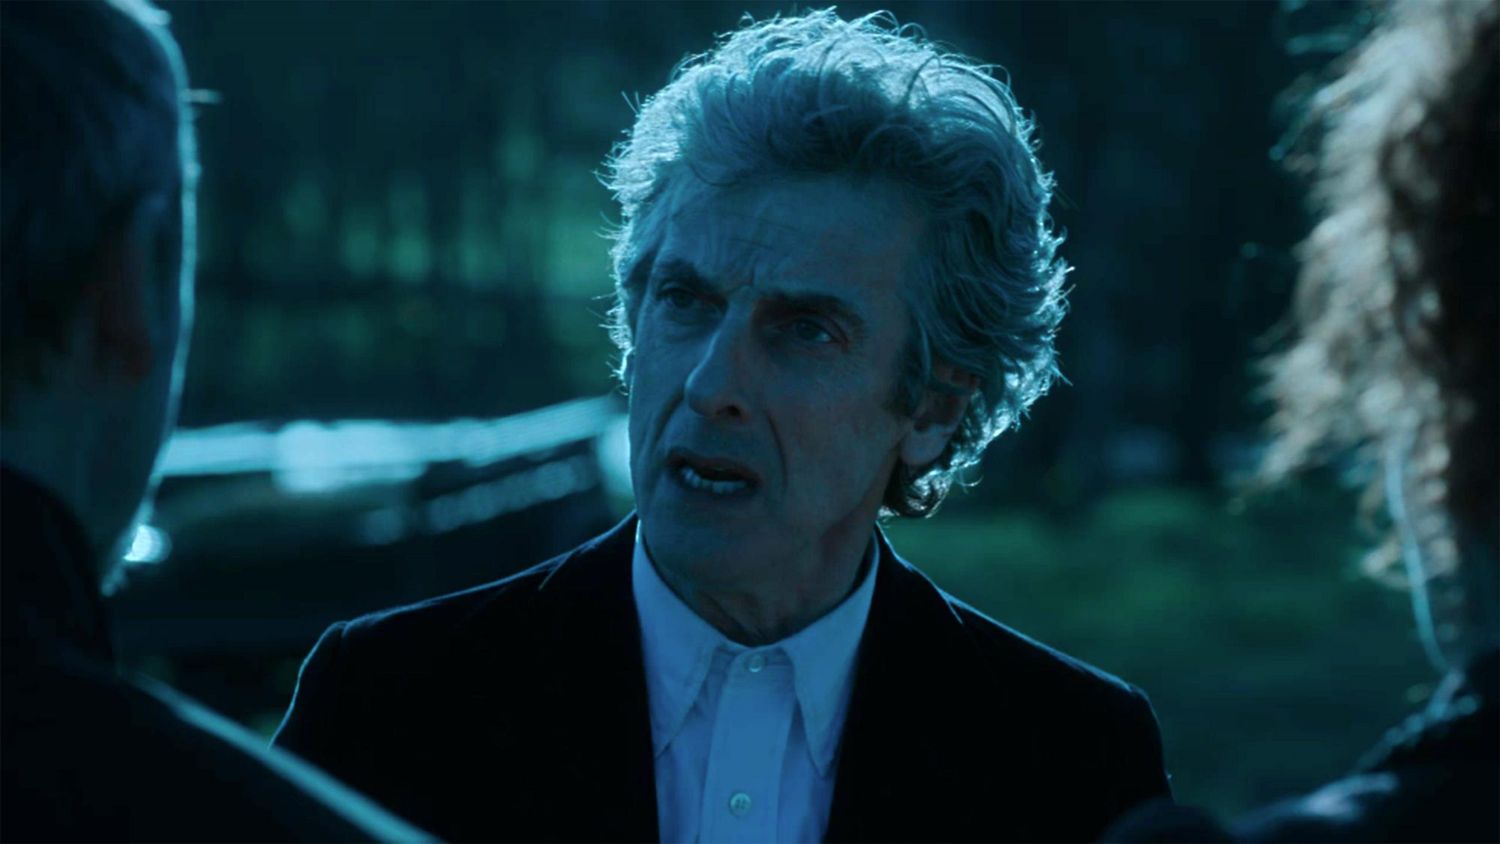 5. Just be kind. (From The Doctor Falls)